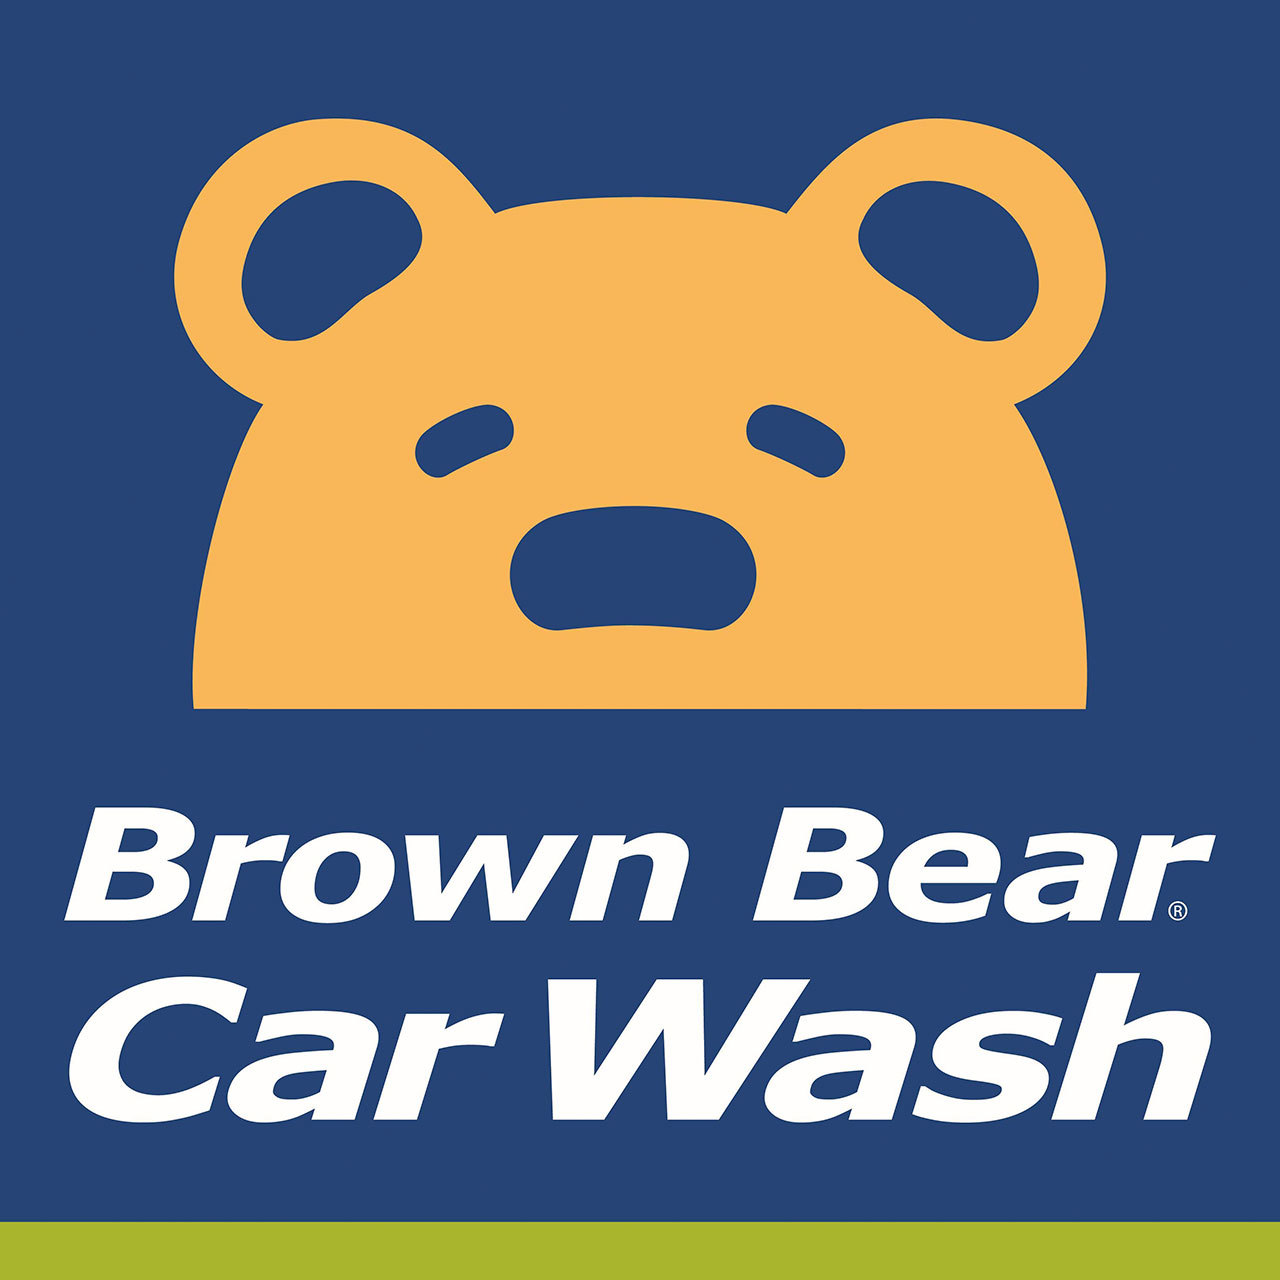 Brown Bear Car Wash: saluting veterans and service military with free car washes